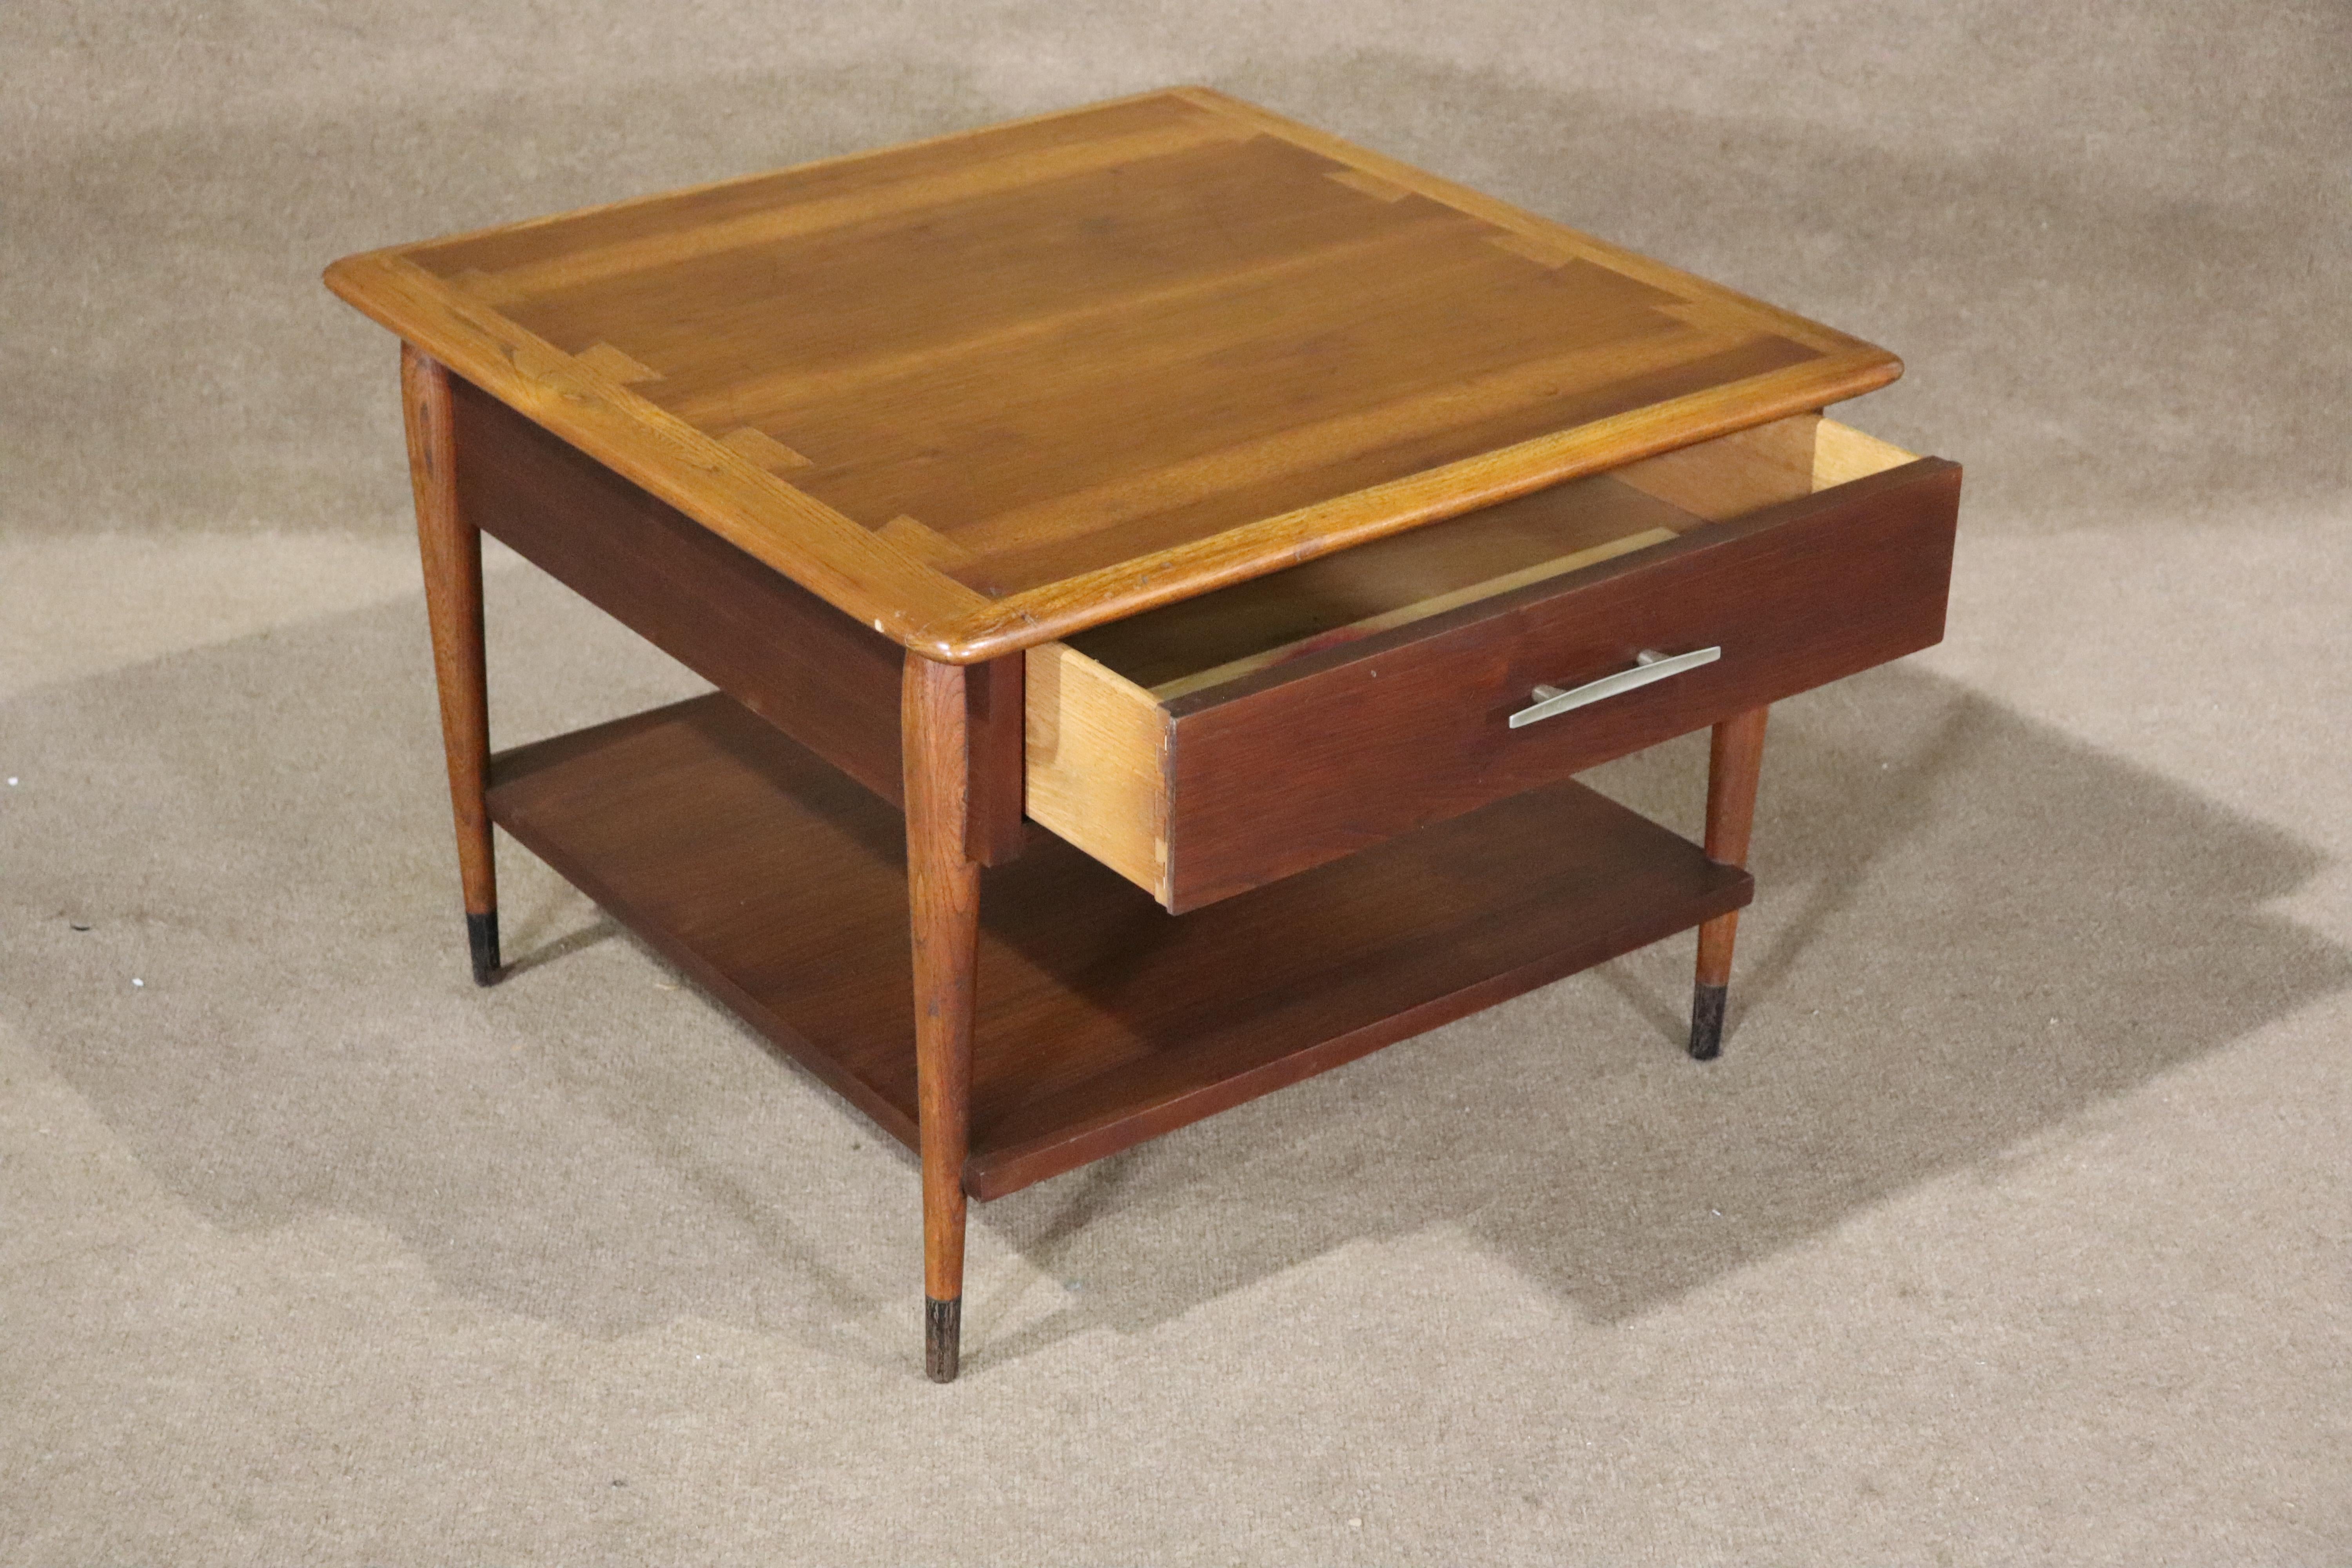 American made end table by Lane Furniture with walnut and oak. Simple mid-century dovetail design with drawer and bottom shelf storage.
Please confirm location NY or NJ